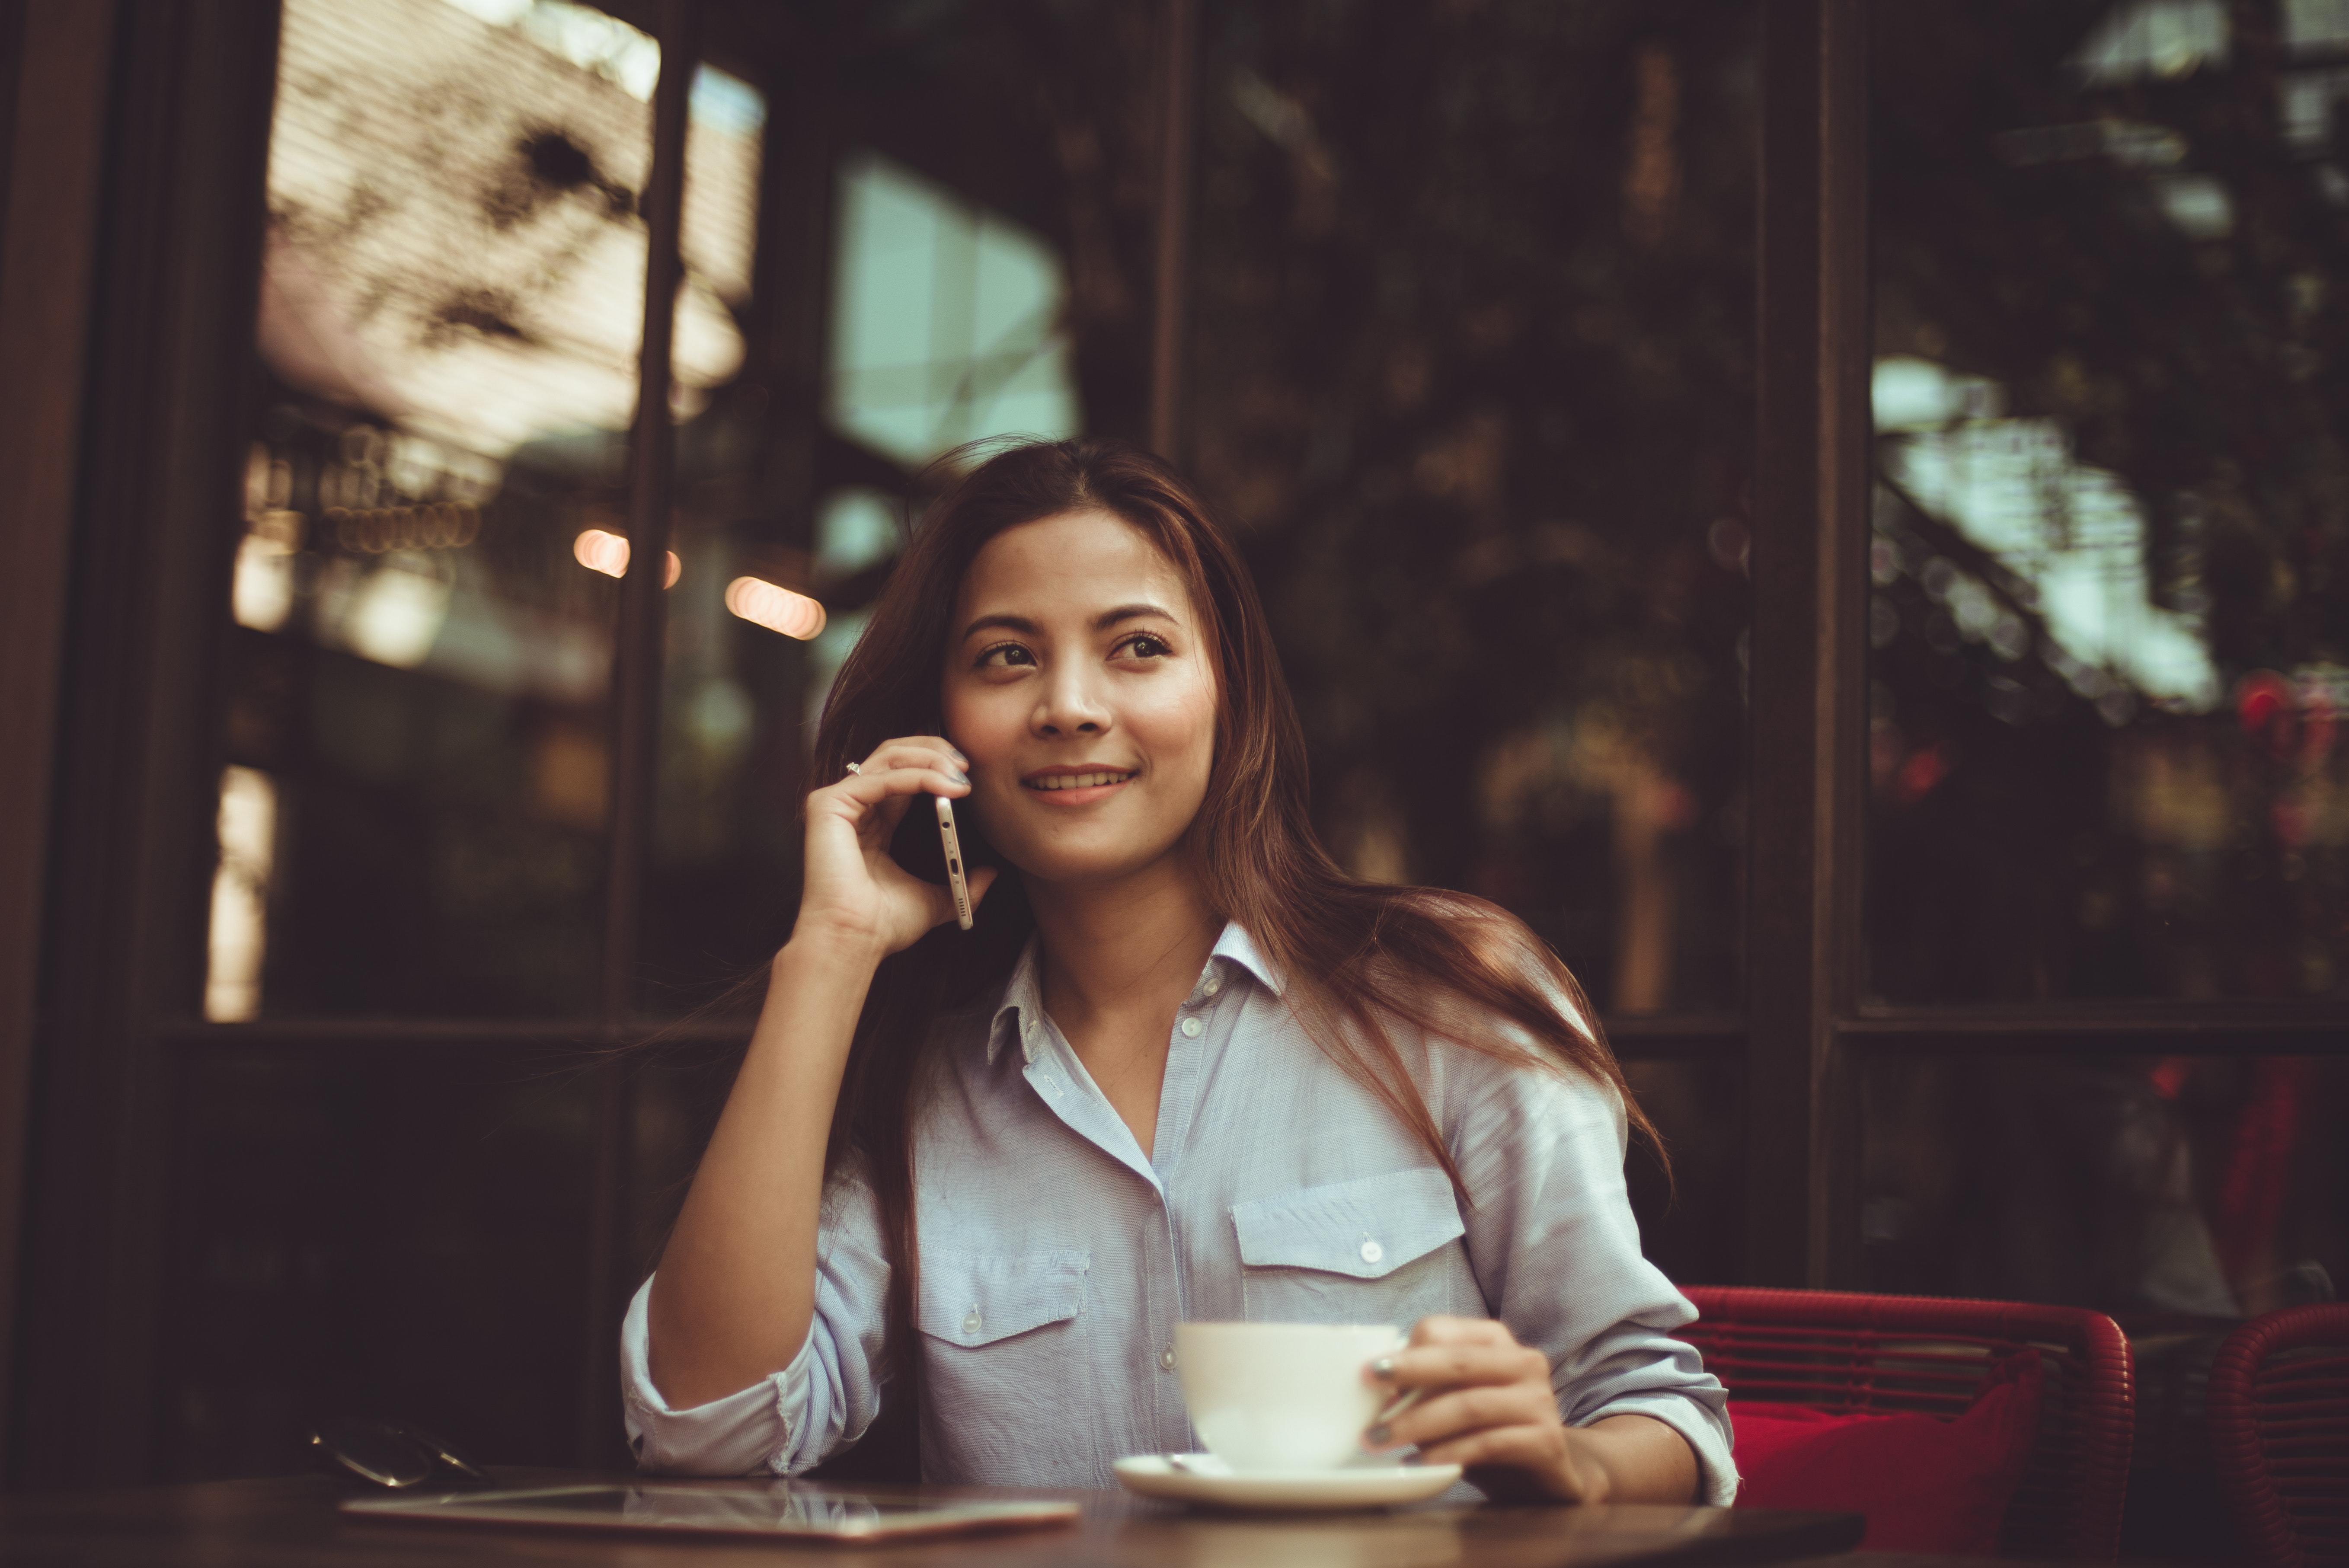 Portrait of young woman using mobile phone in cafe photo